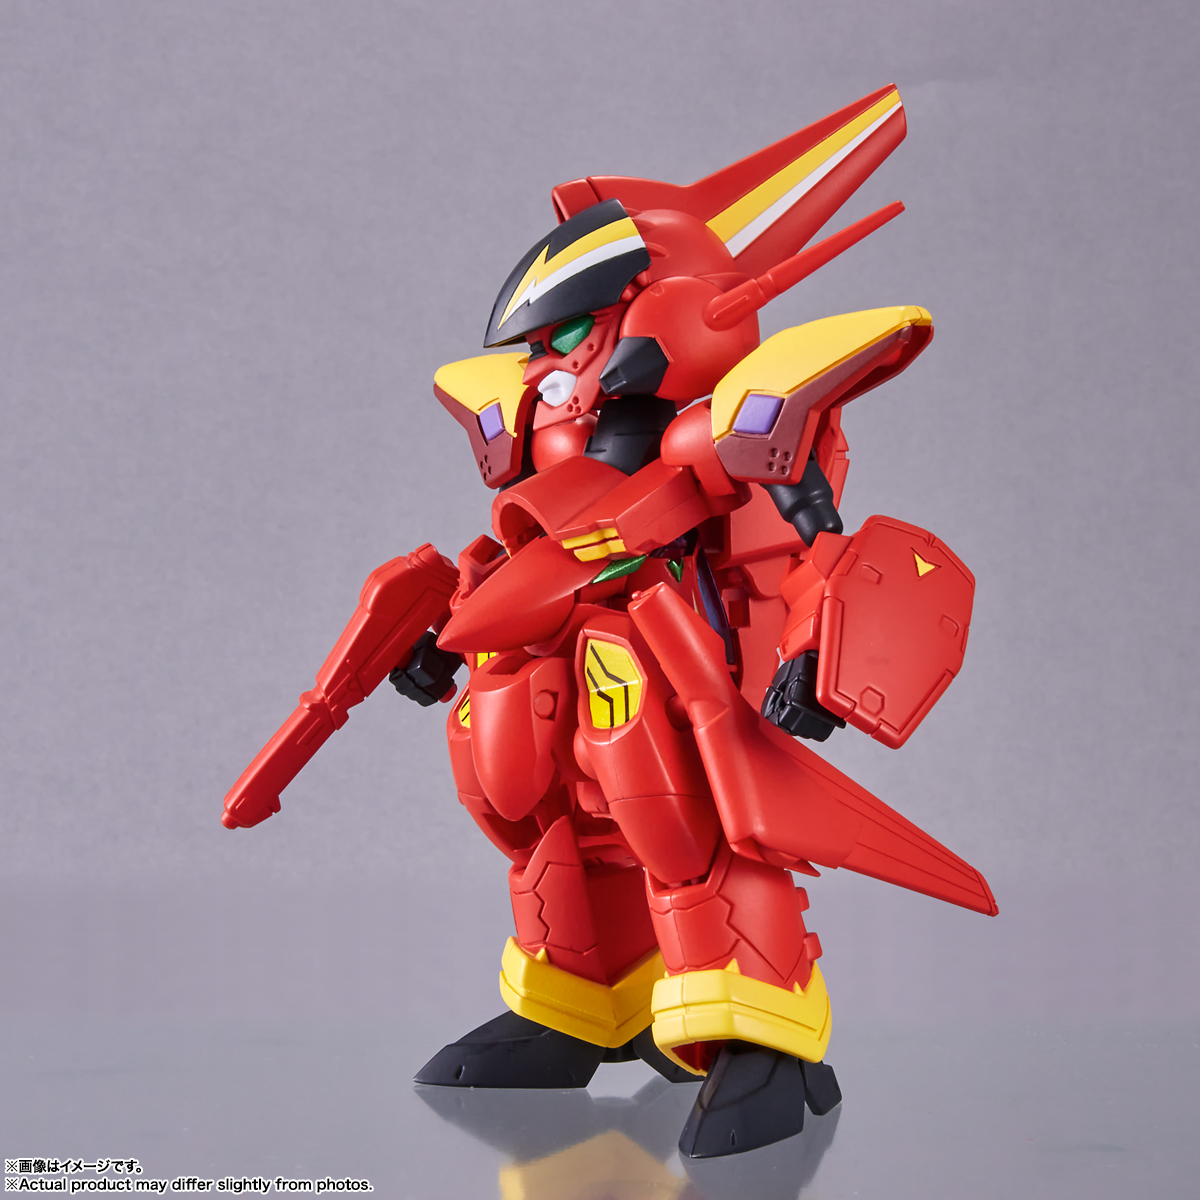 macross-7-vf-19-custom-fire-valkyrie-and-basara-nekki-tiny-session-action-figure-set image count 3